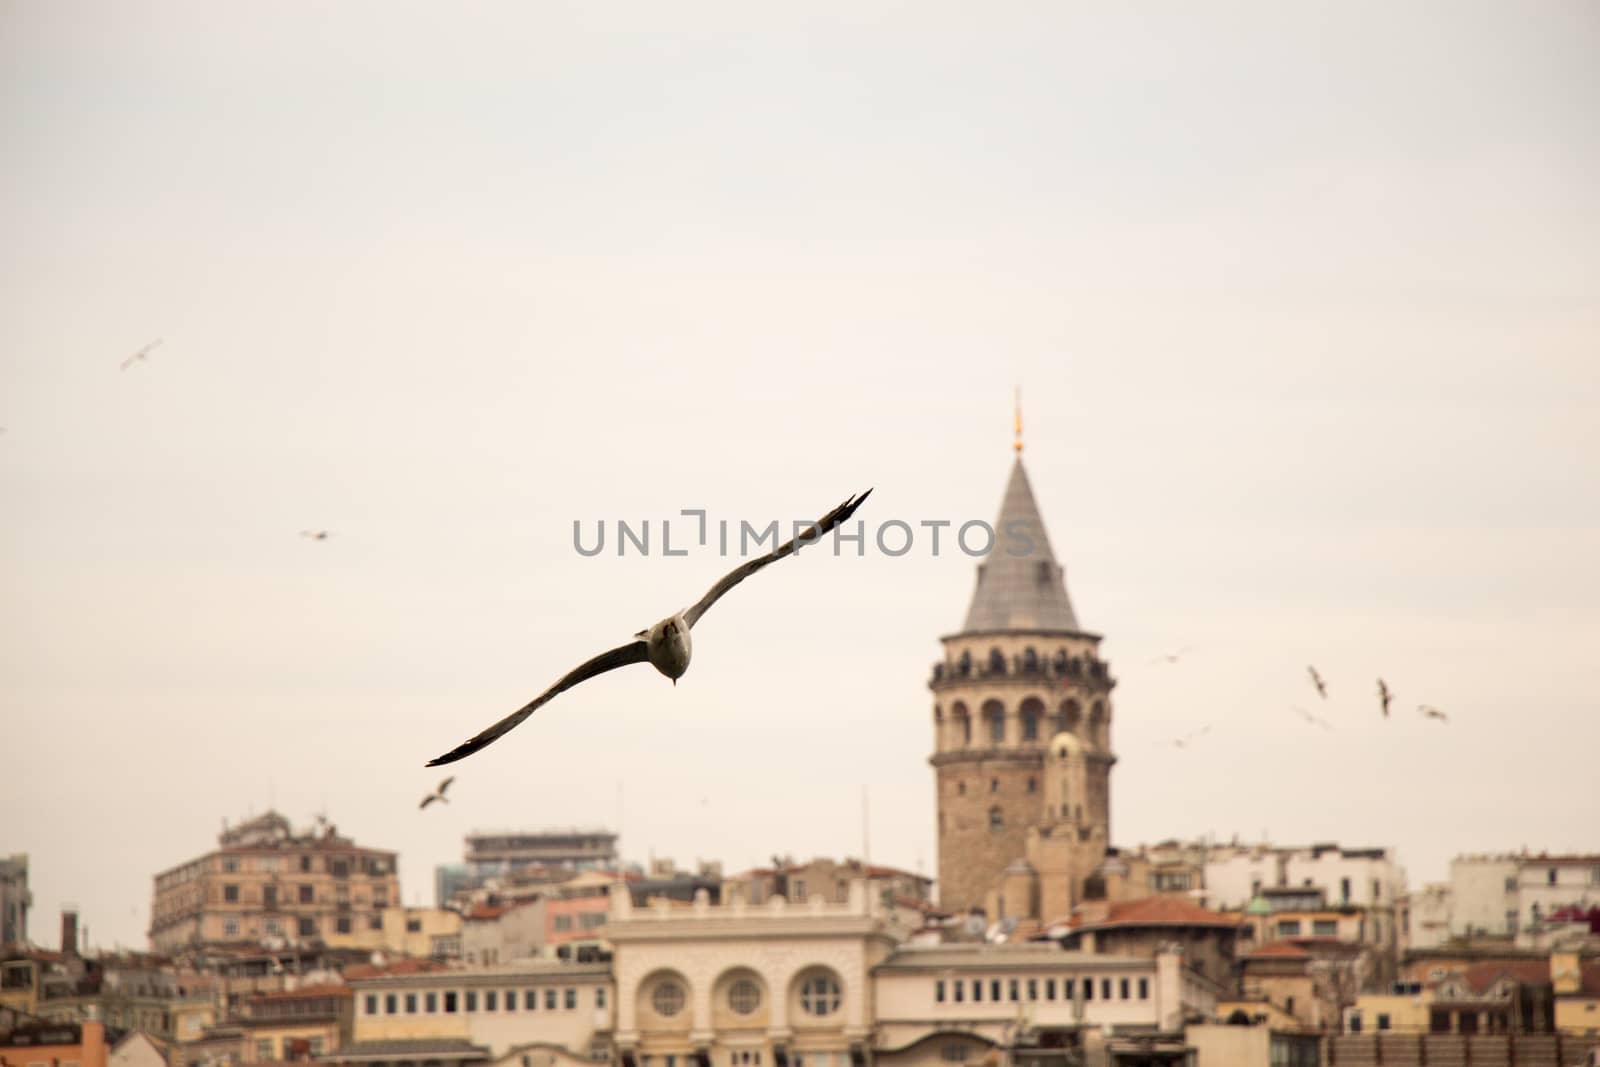  Galata Tower from Byzantium times in Istanbul by berkay